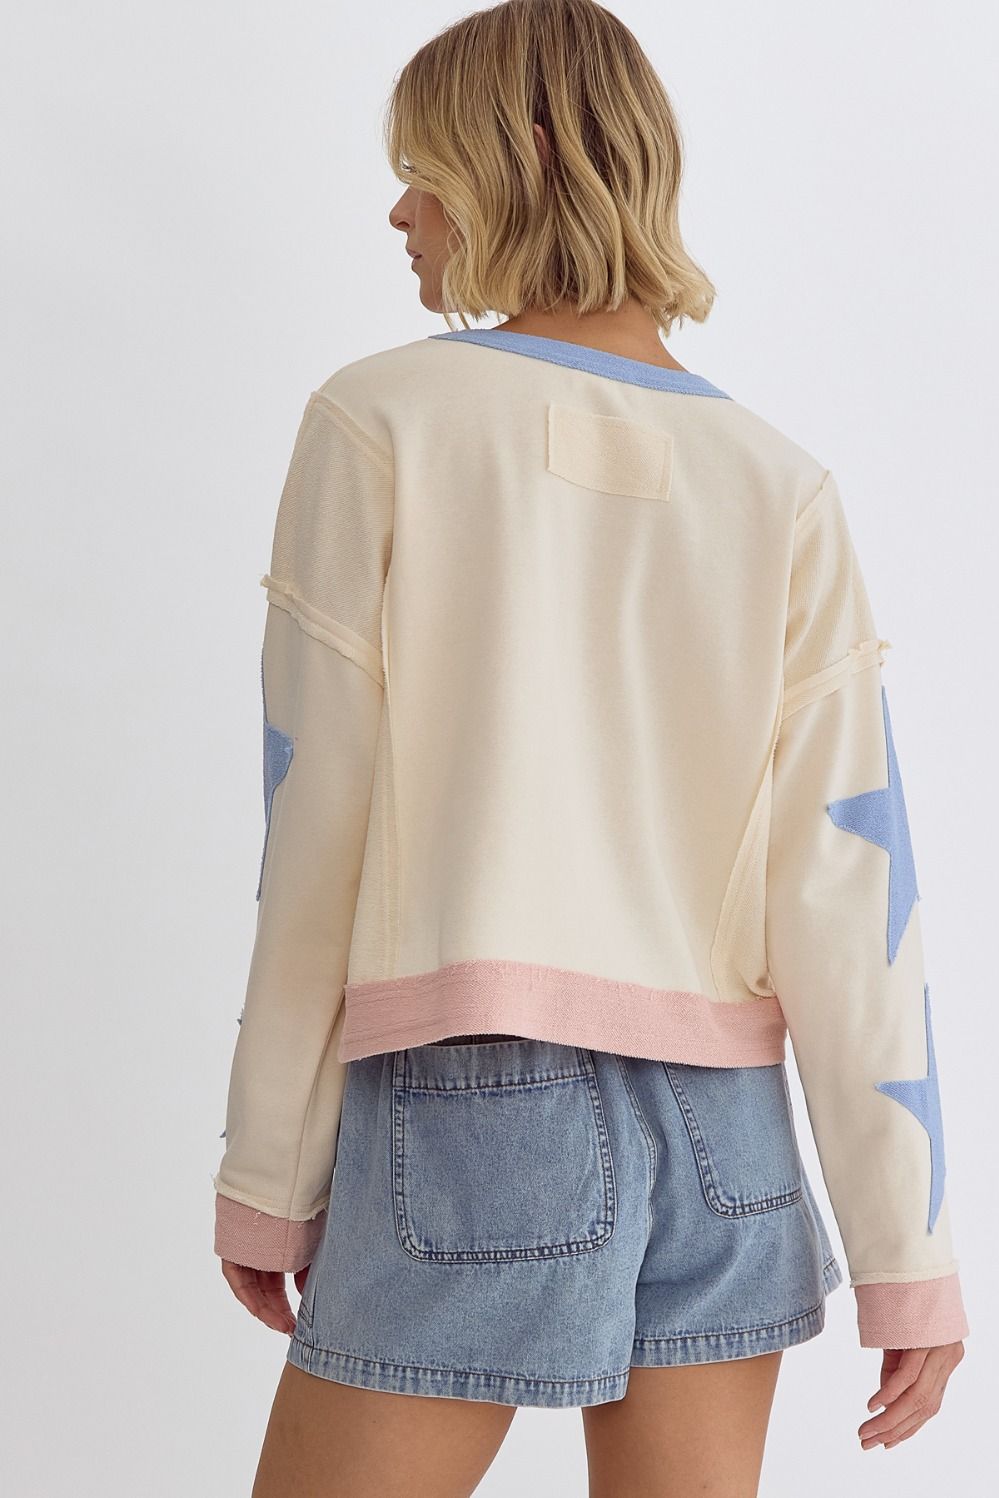 Entro | Star Patch Pullover Top | Sweetest Stitch Shop for Cute Tops